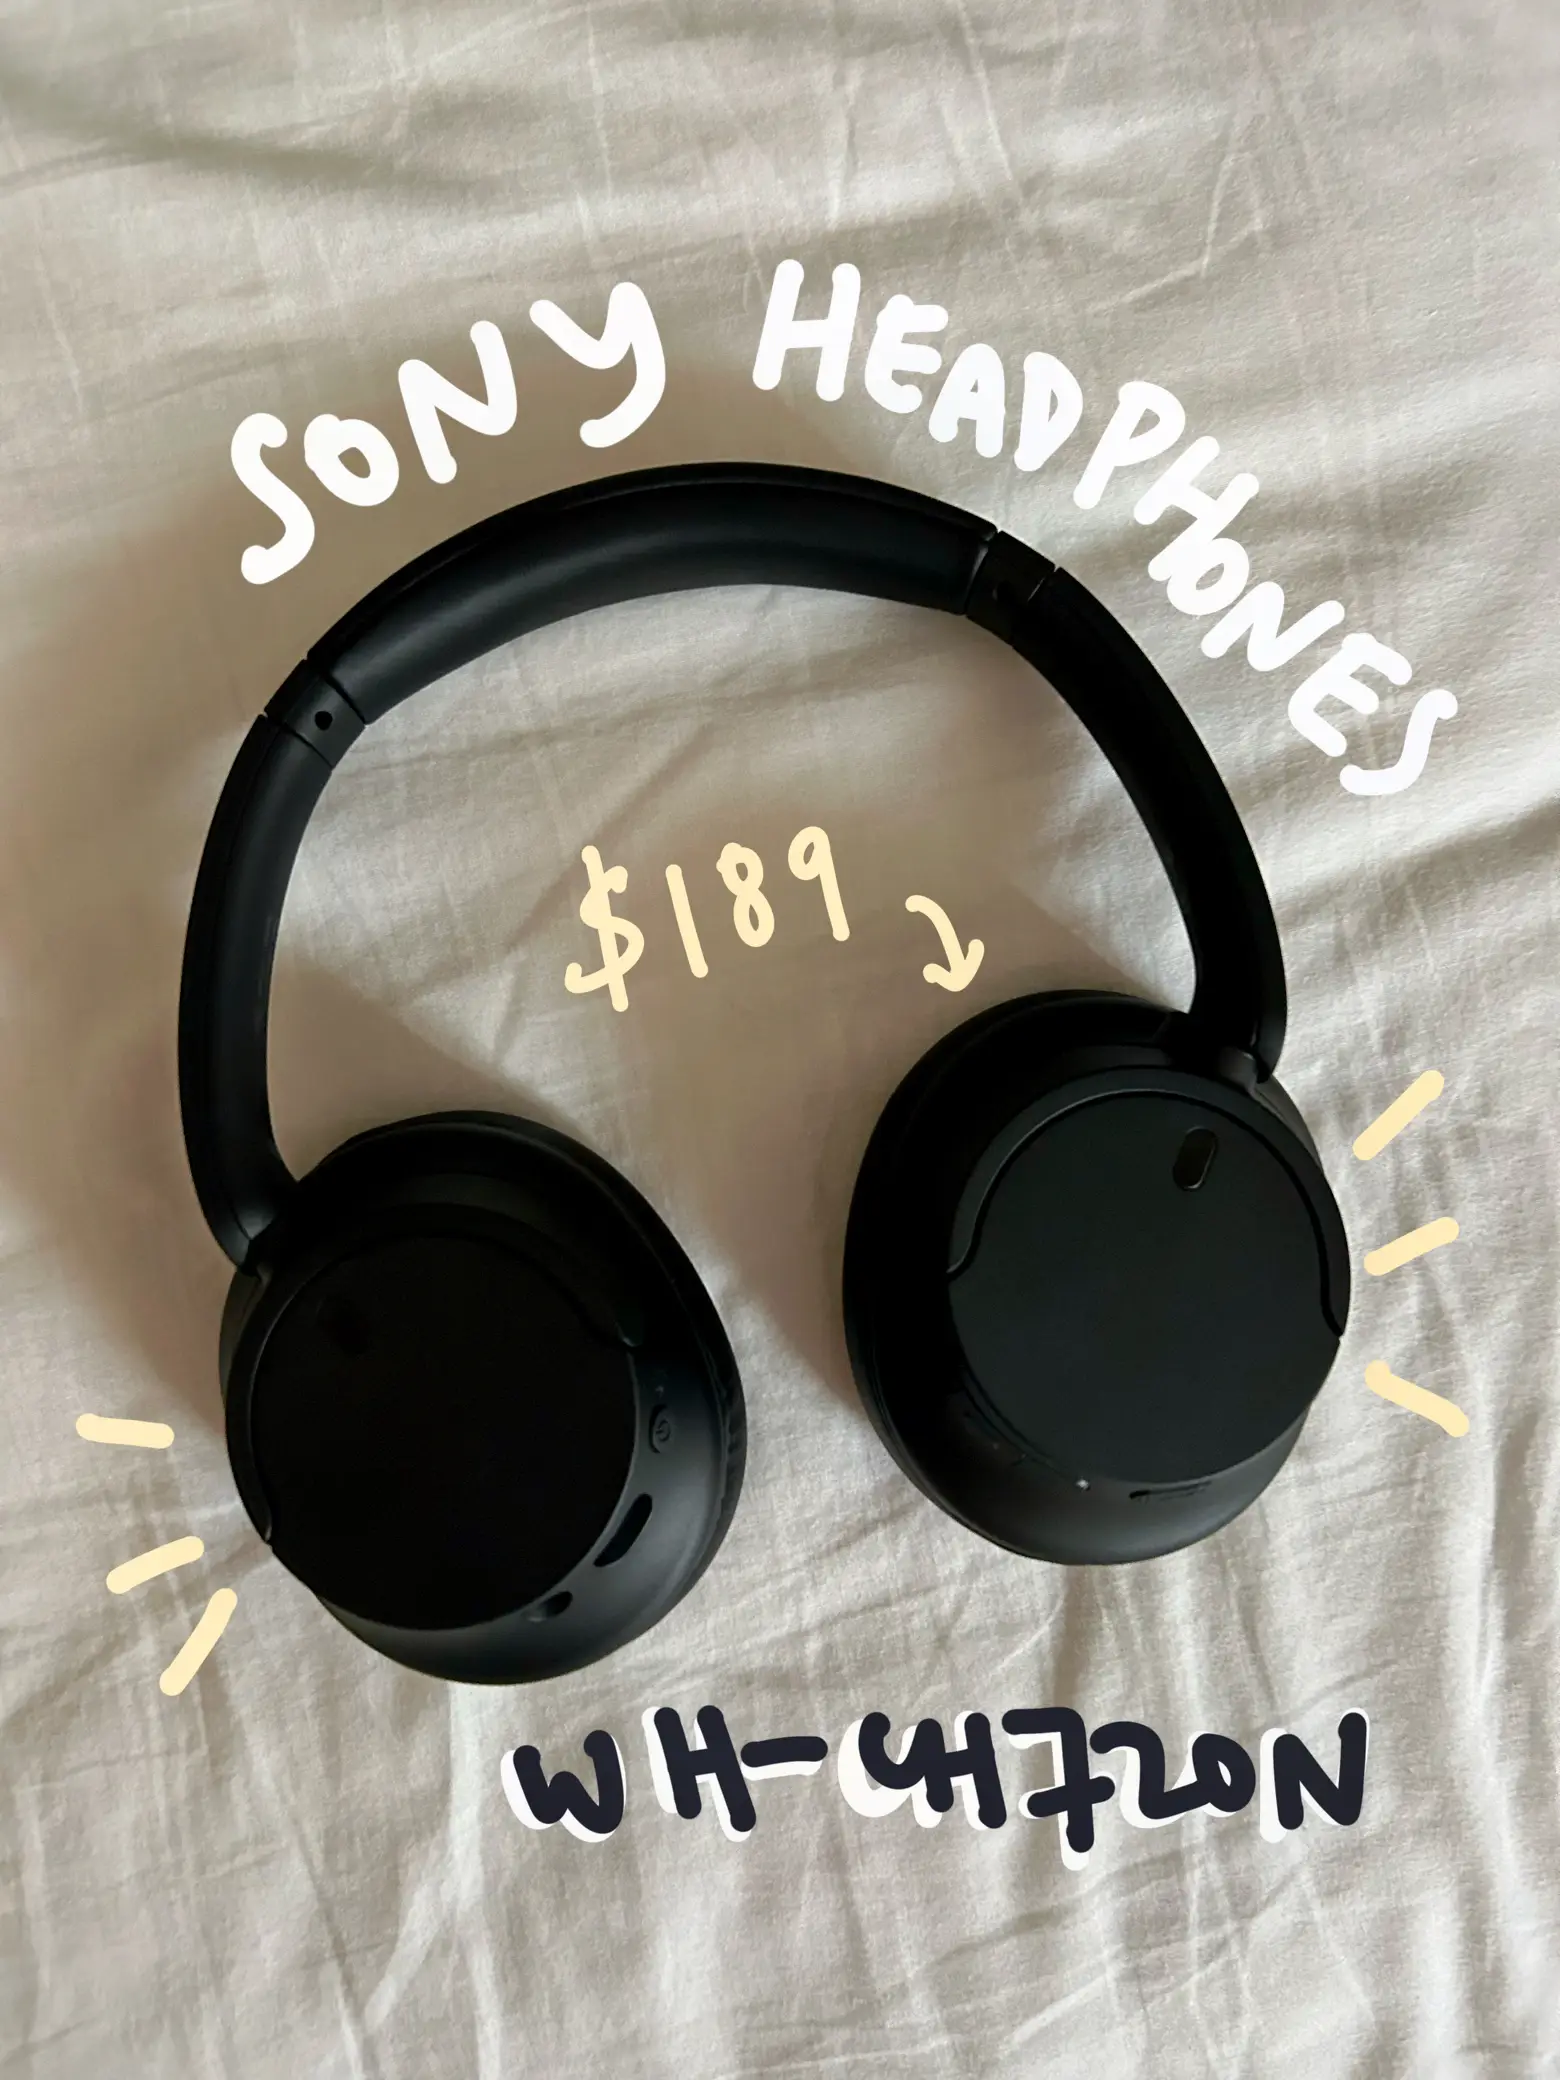 I tried Sony's WH-CH720N noise-canceling headphones, and they're a